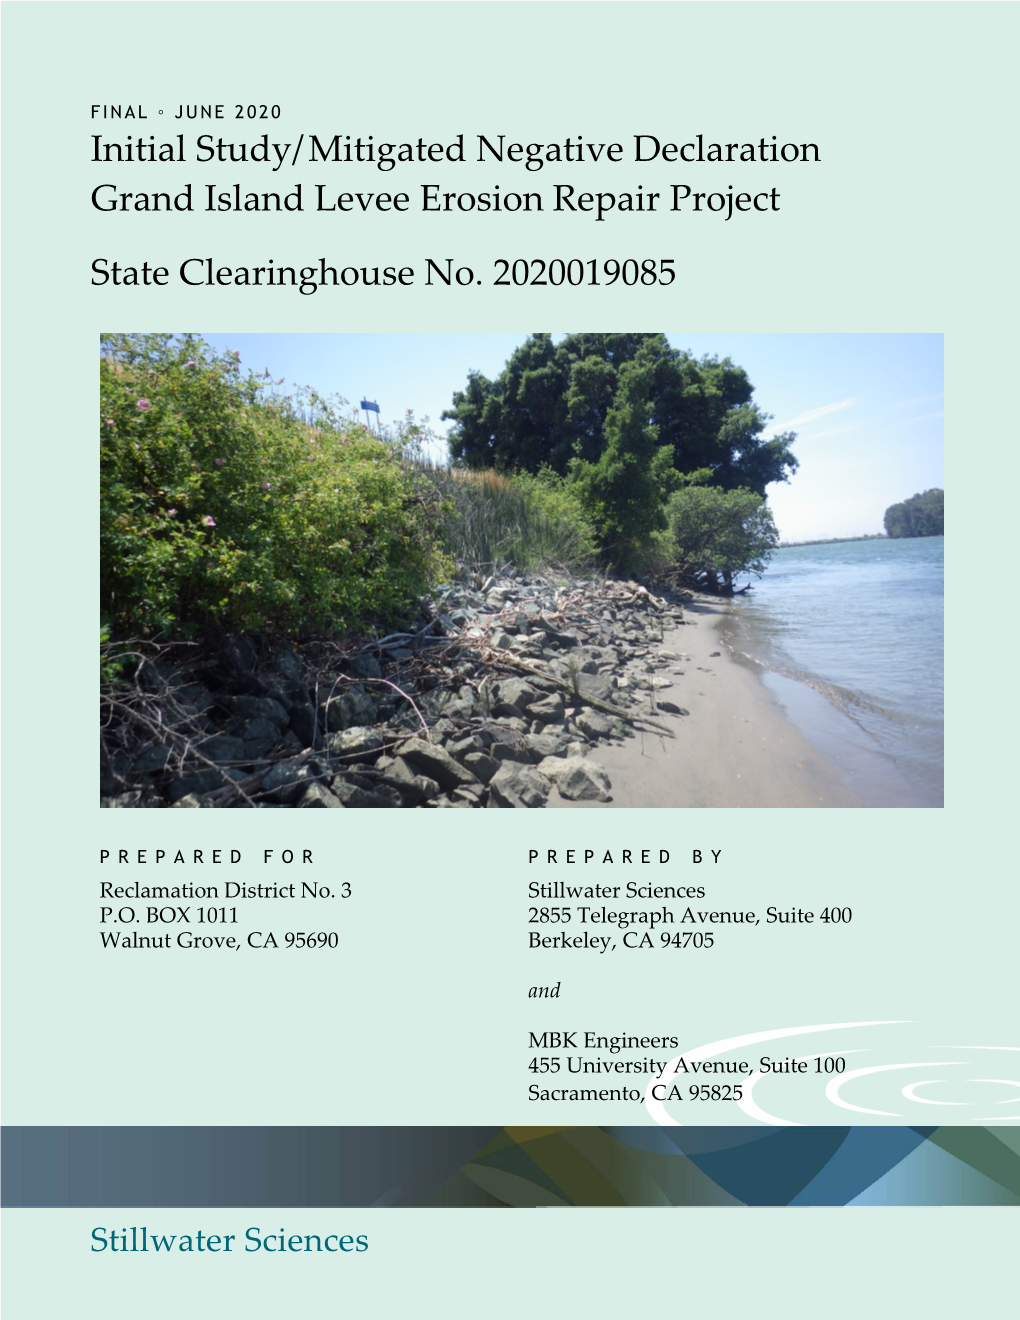 Initial Study/Mitigated Negative Declaration Grand Island Levee Erosion Repair Project State Clearinghouse No. 2020019085